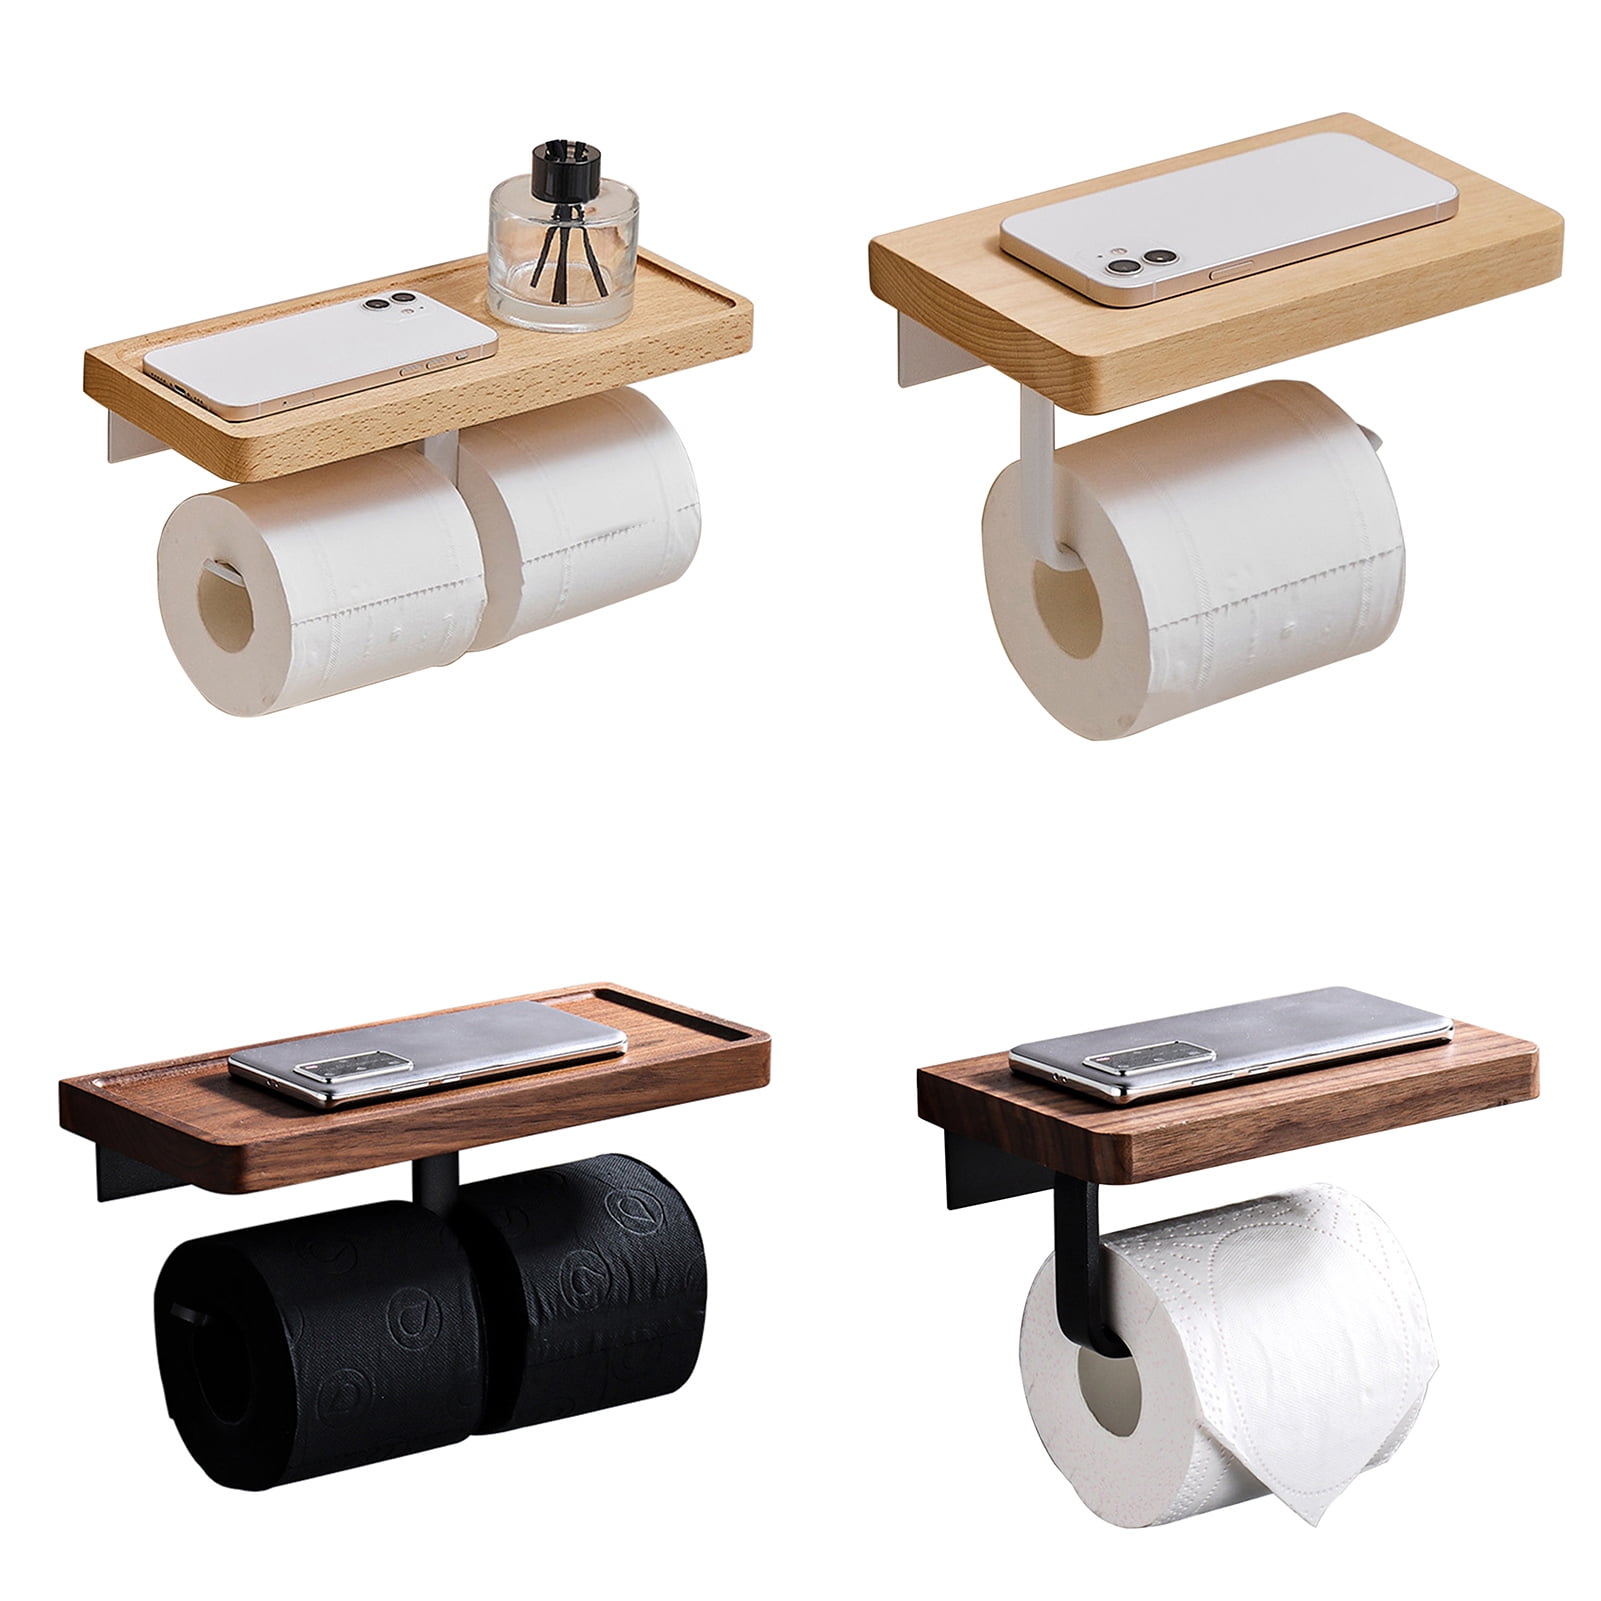 Solid Wood Tissue Holder Paper Roll Holder Wall-mounted Toilet Paper  Holders Shelf Napkin Holder Wall